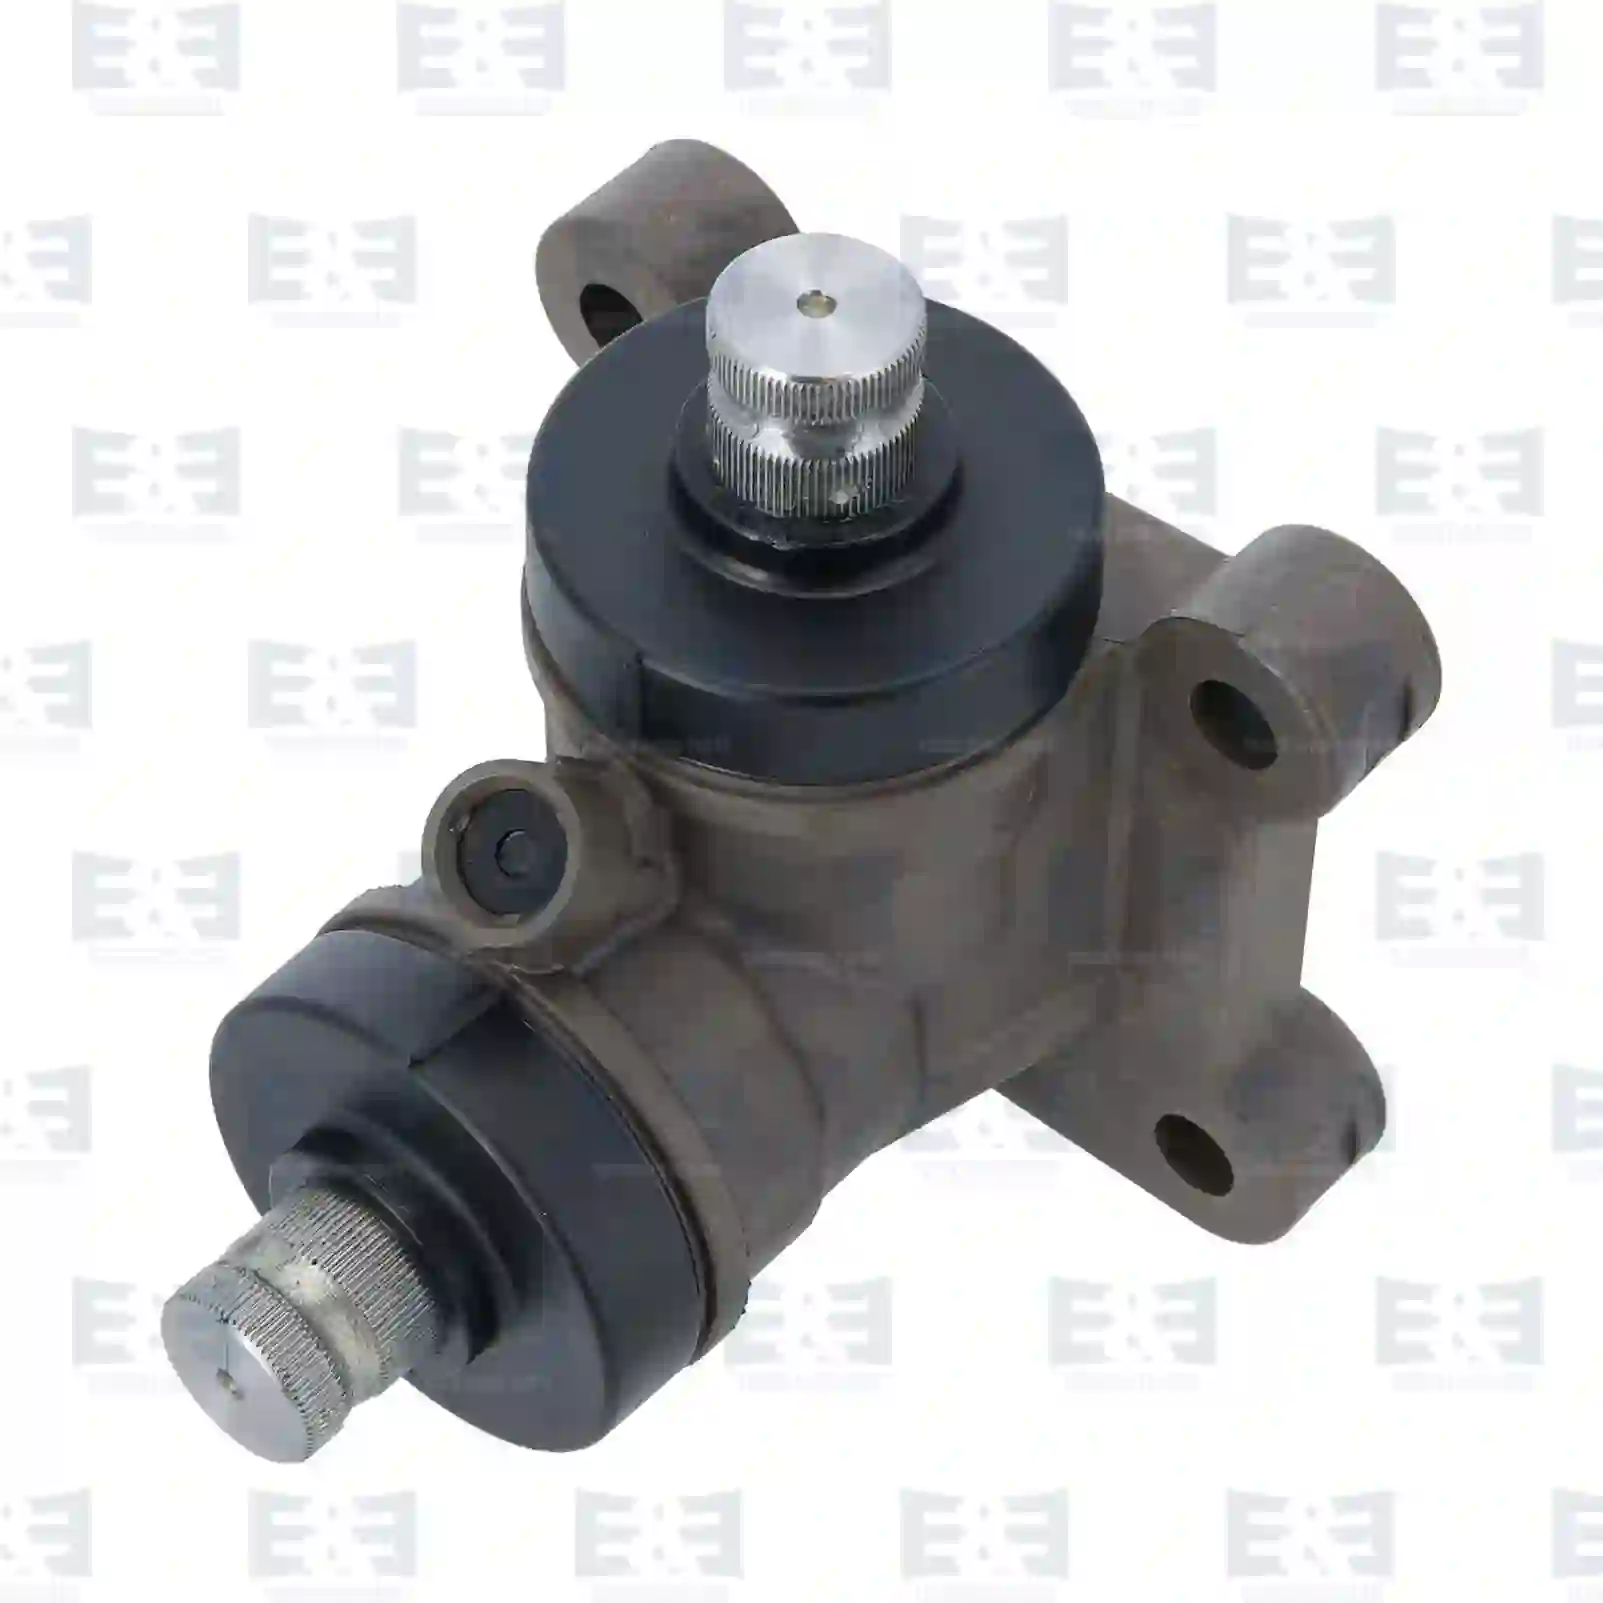 Steering Box Steering gear, EE No 2E2205977 ,  oem no:20255719, 856252, 4503271900003, 0220330, 99707759800, 03116995, 8014809, 521004708, 521004782, 82461026005, D027443, 6344600025, 014007378, V9518685, 7408196553, 478568, 1221221000, 82461026005, 336529040, 10598331, 20255719, 3035325, 8196553, 9518685 E&E Truck Spare Parts | Truck Spare Parts, Auotomotive Spare Parts